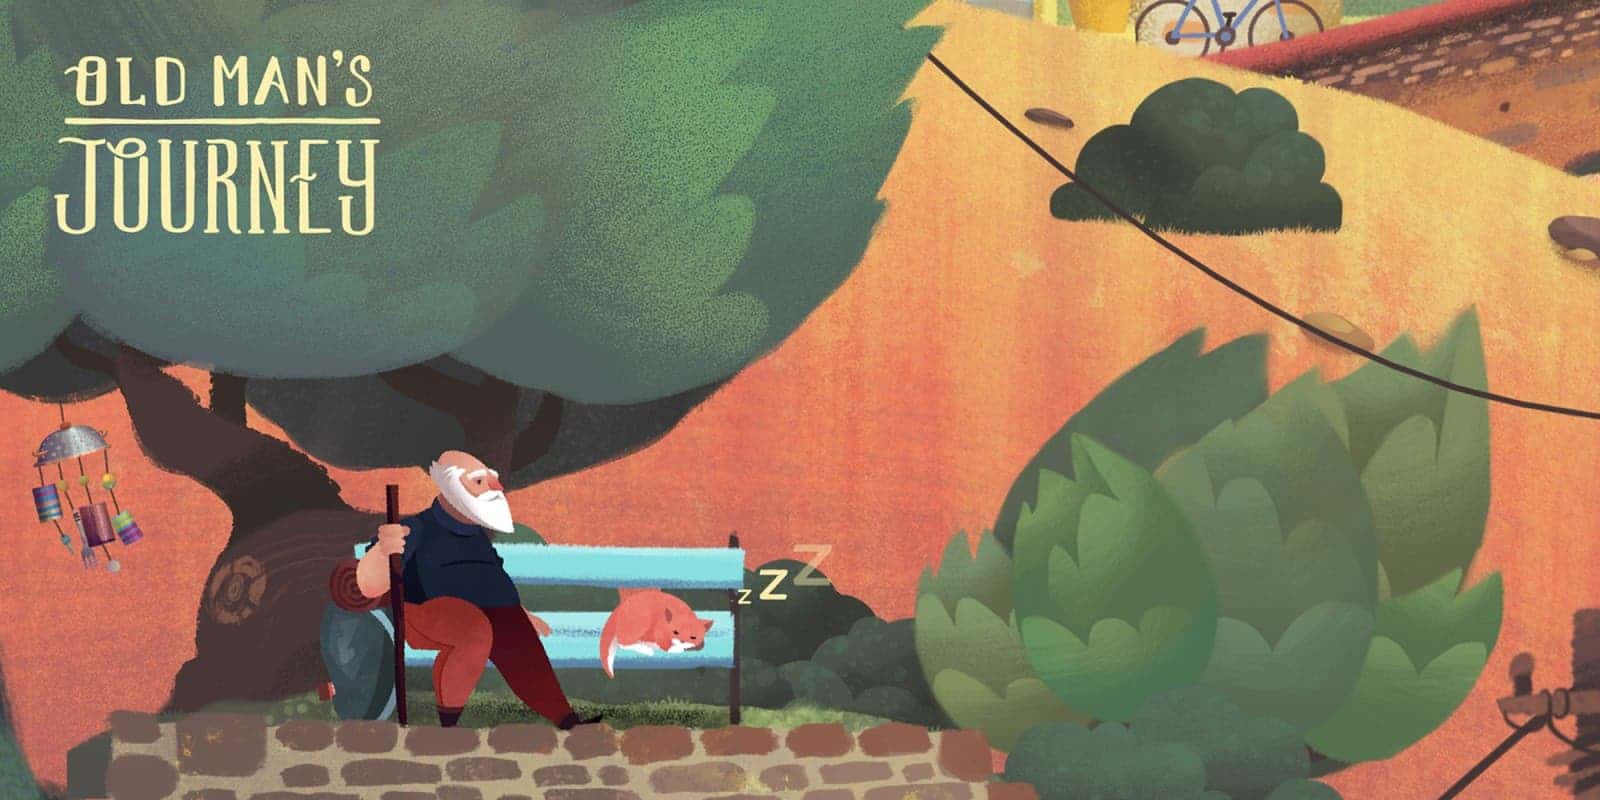 Old Man's Journey offline game for iOS